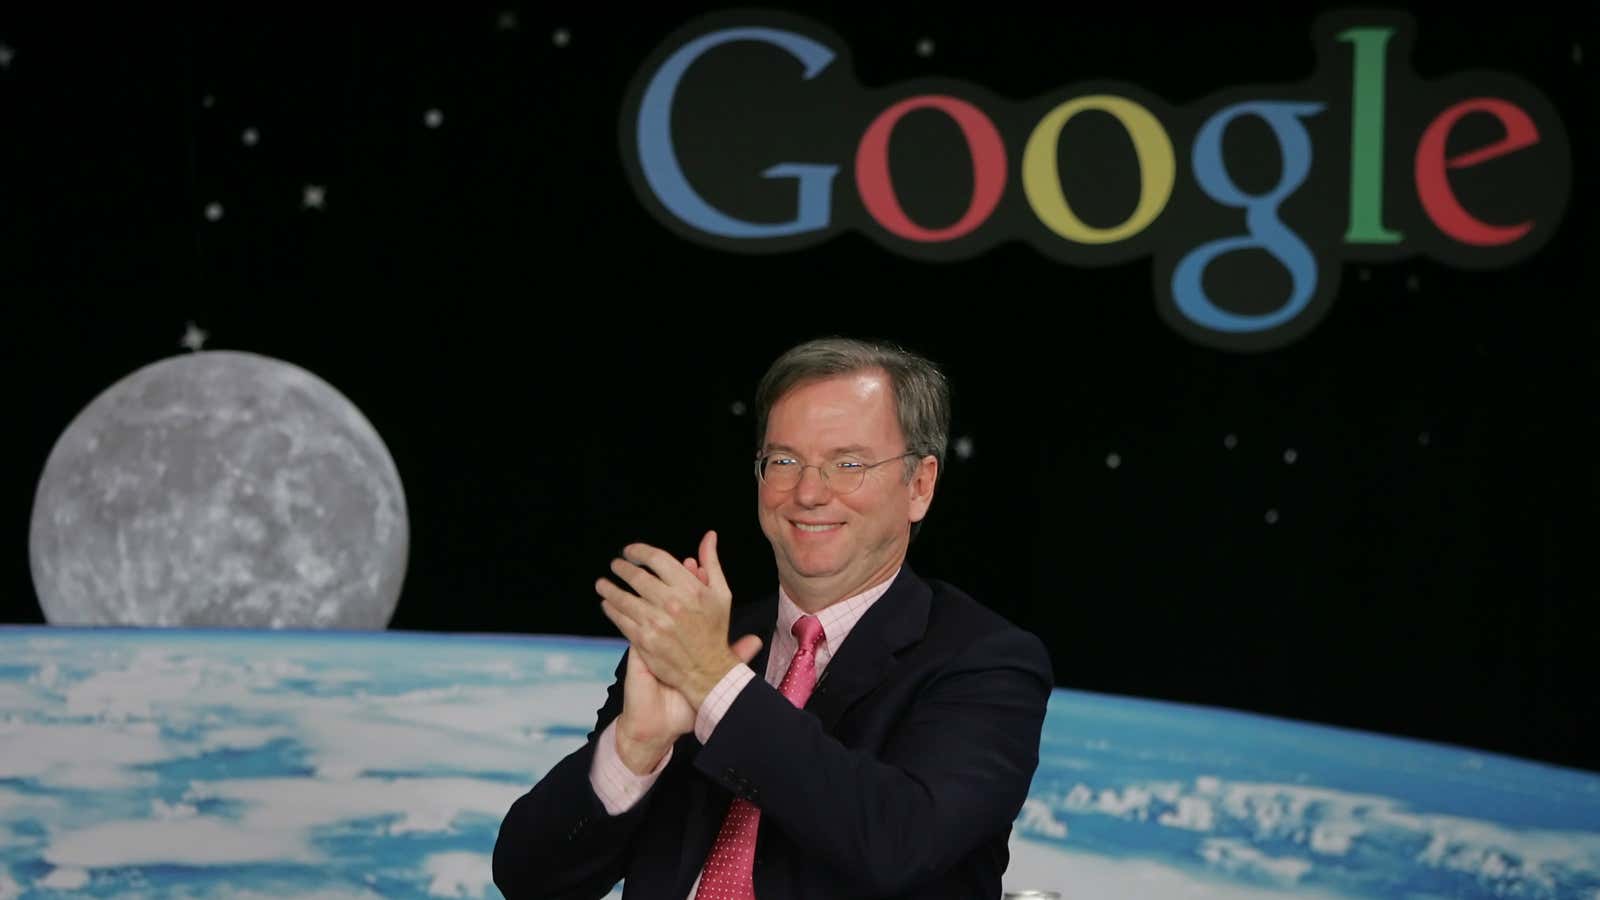 Chairman Eric Schmidt in 2005, as Google began its global conquest.